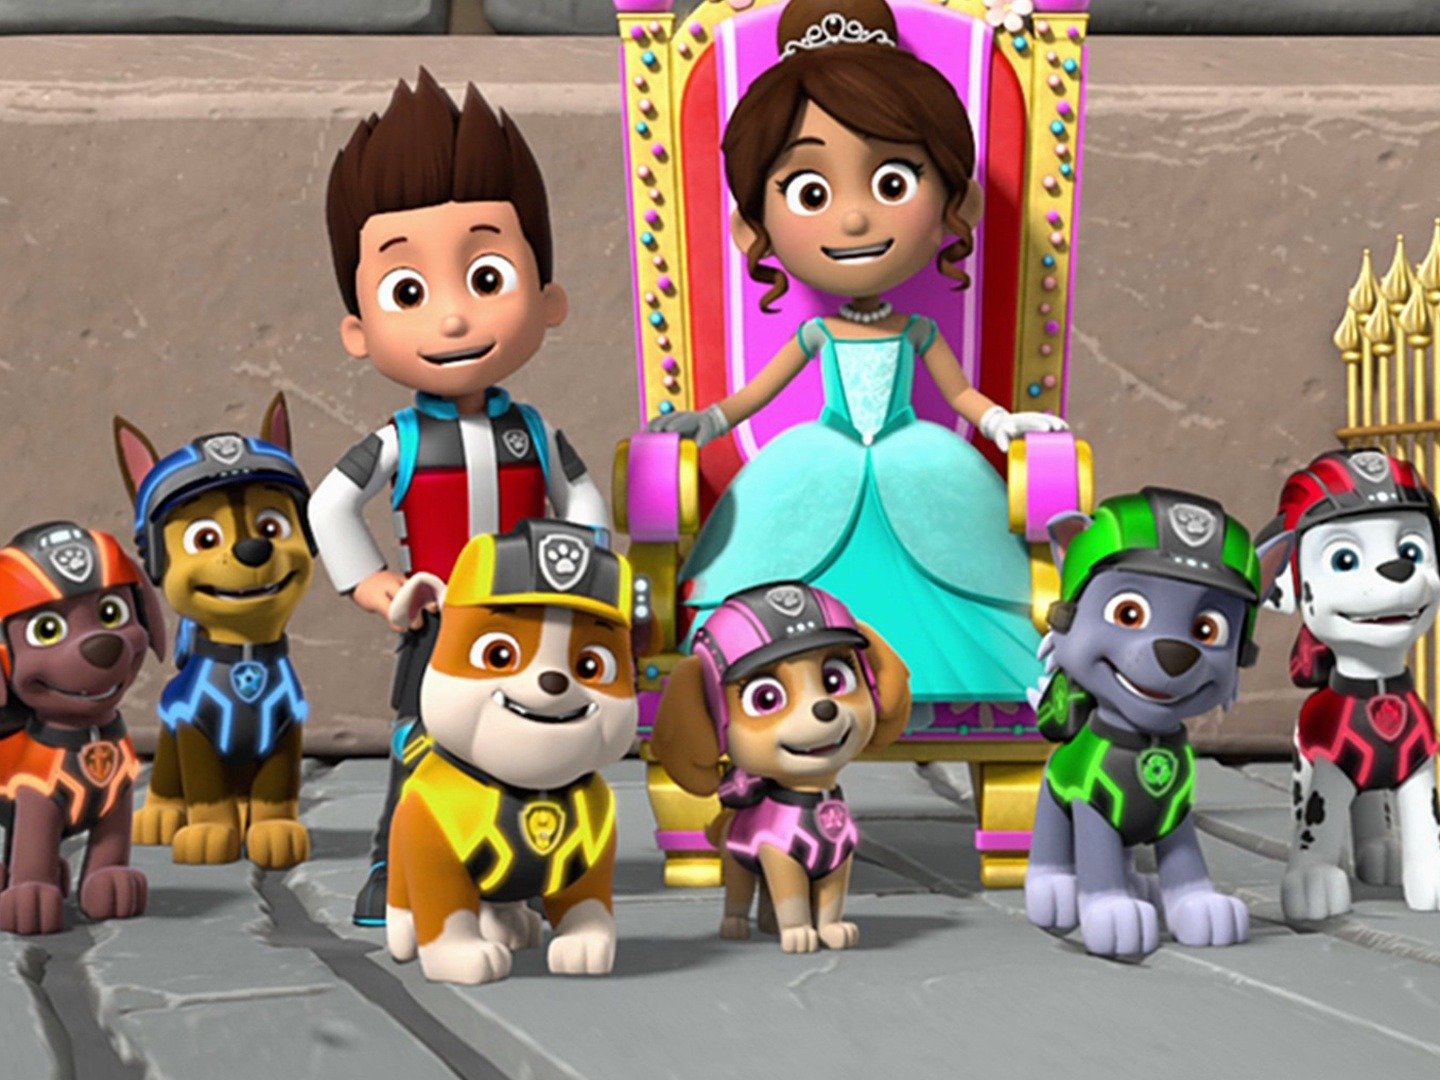 PAW Patrol on TV | Season 4 | Channels and schedules | TVTurtle.com